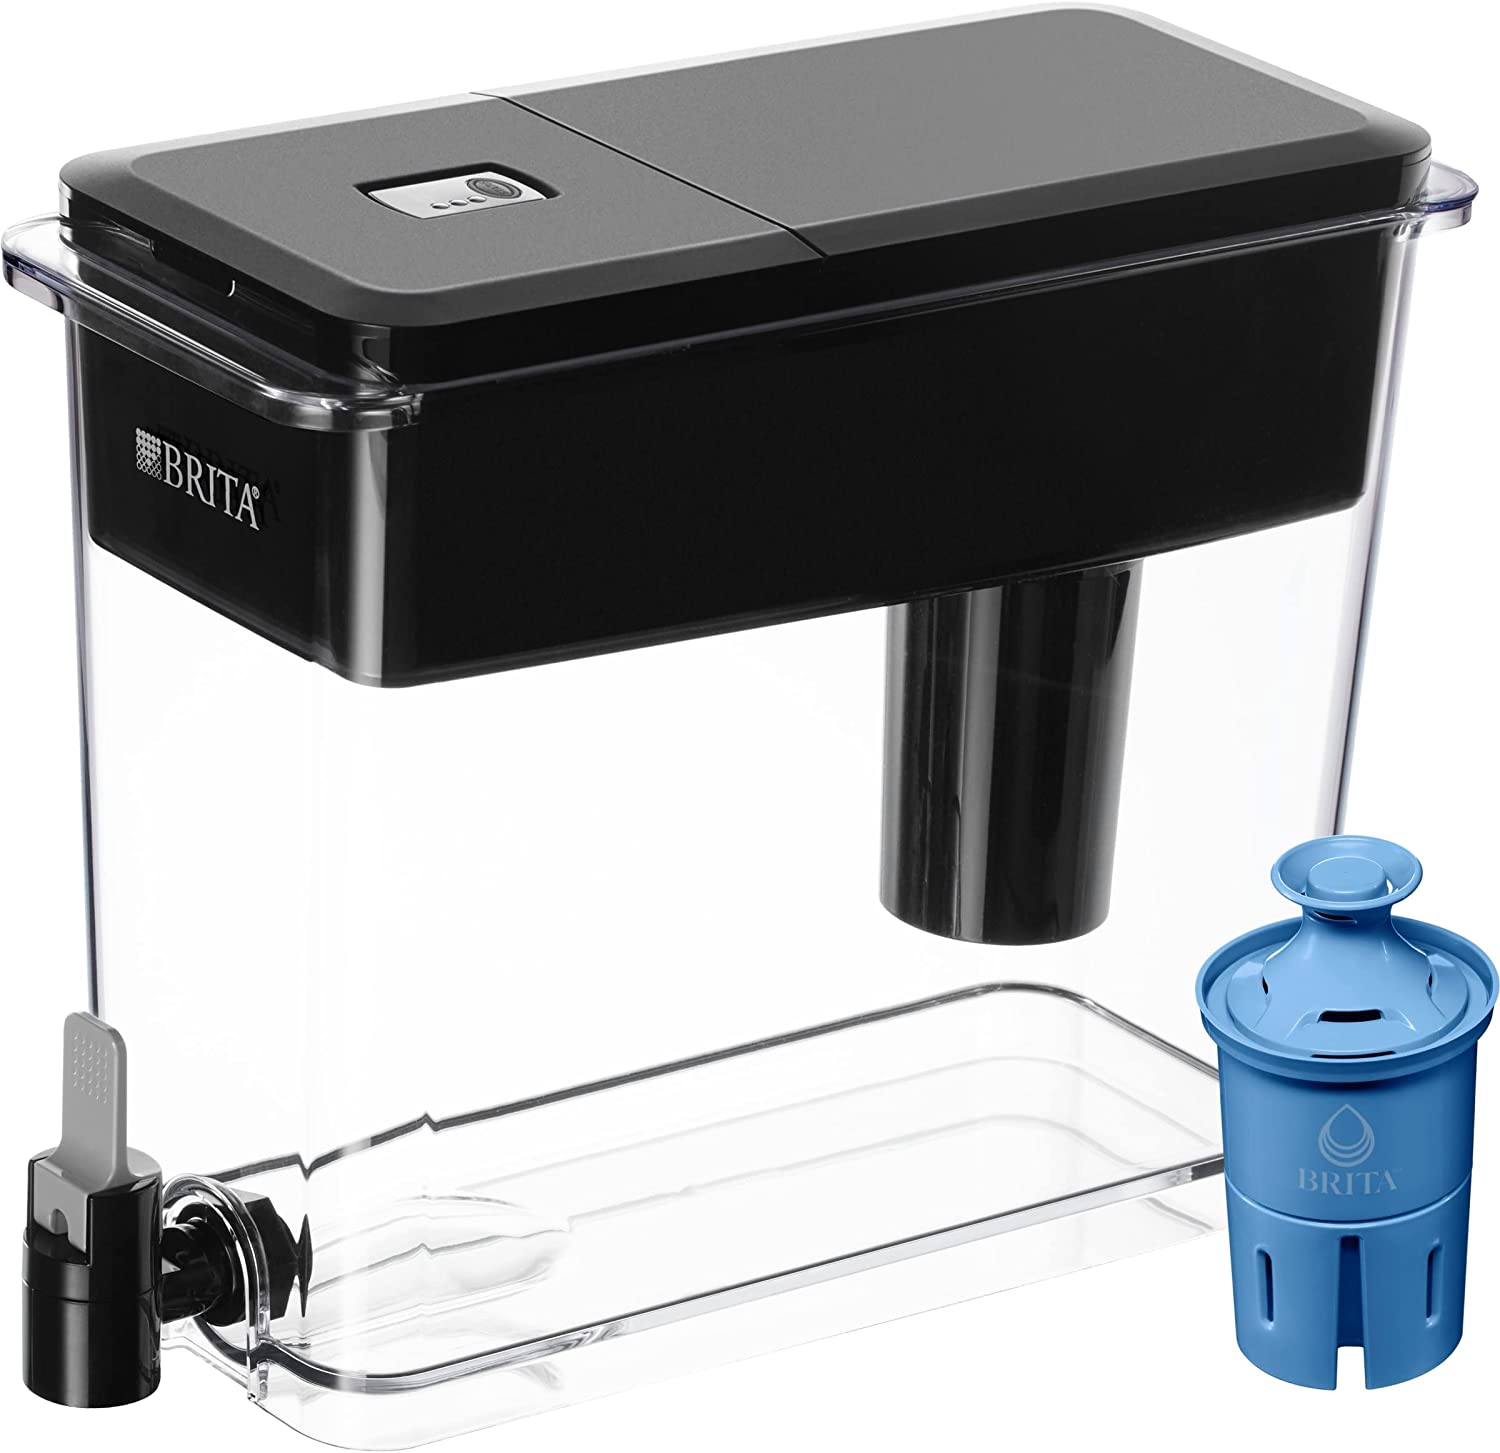 Brita XL Water Filter Dispenser for Tap and Drinking [...]